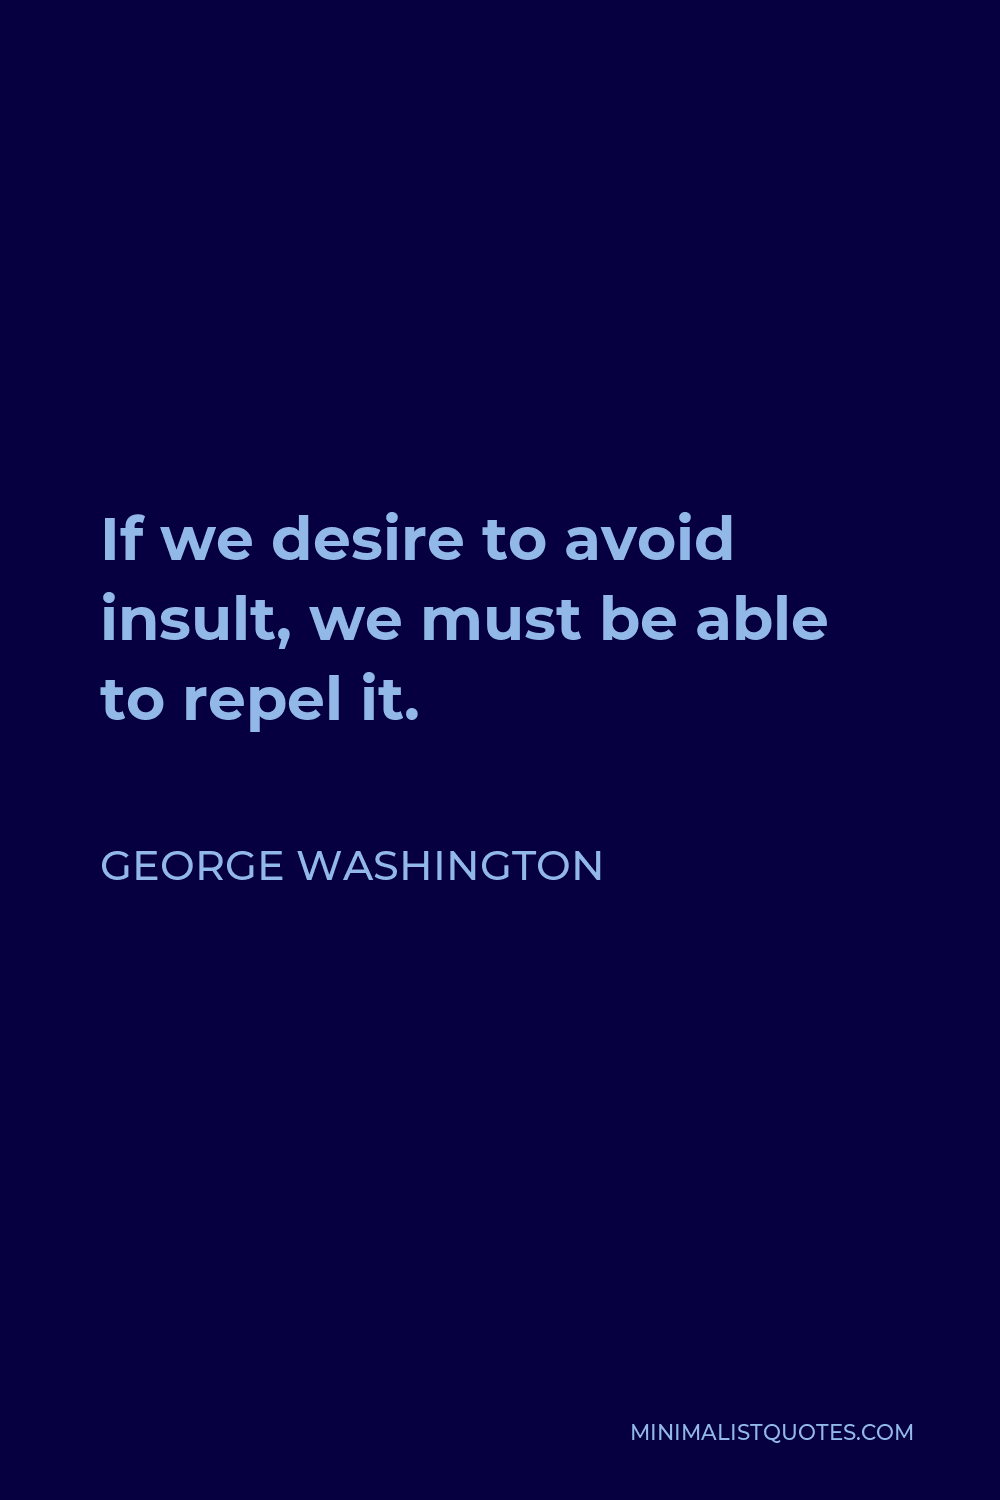 George Washington Quote - If we desire to avoid insult, we must be able to repel it.